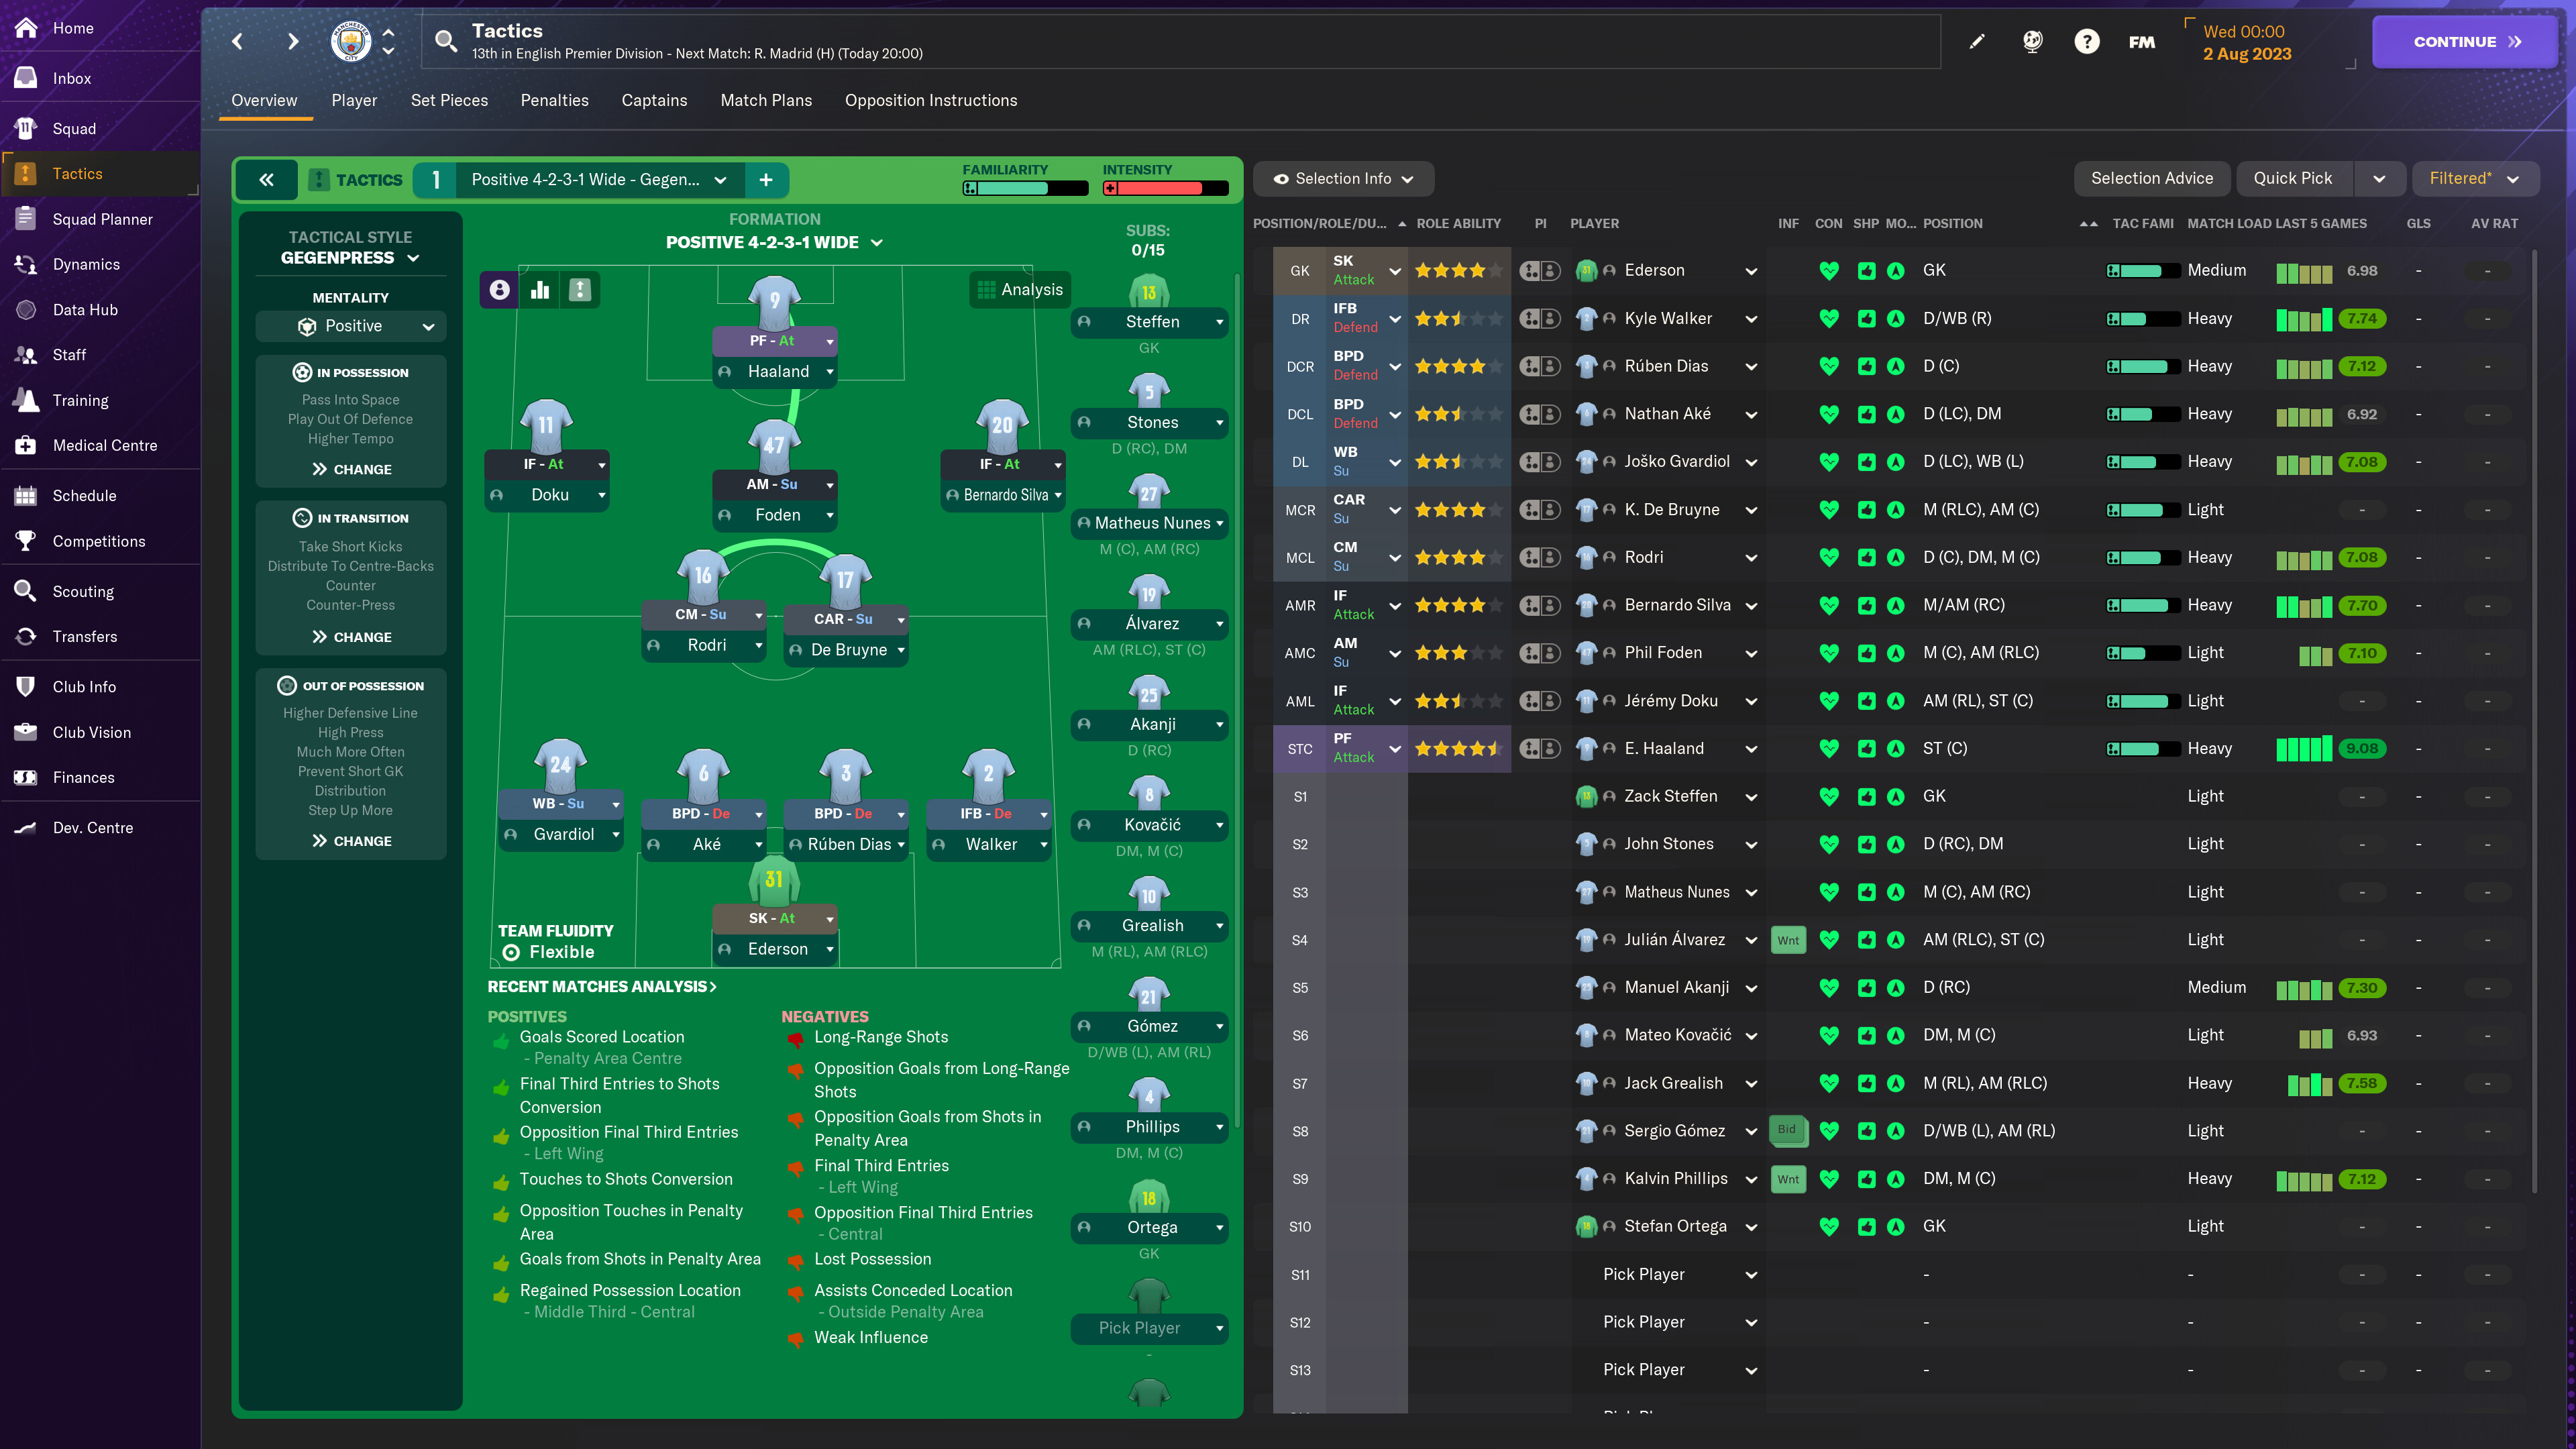 How to Download the Football Manager 2022 Editor - FAQ